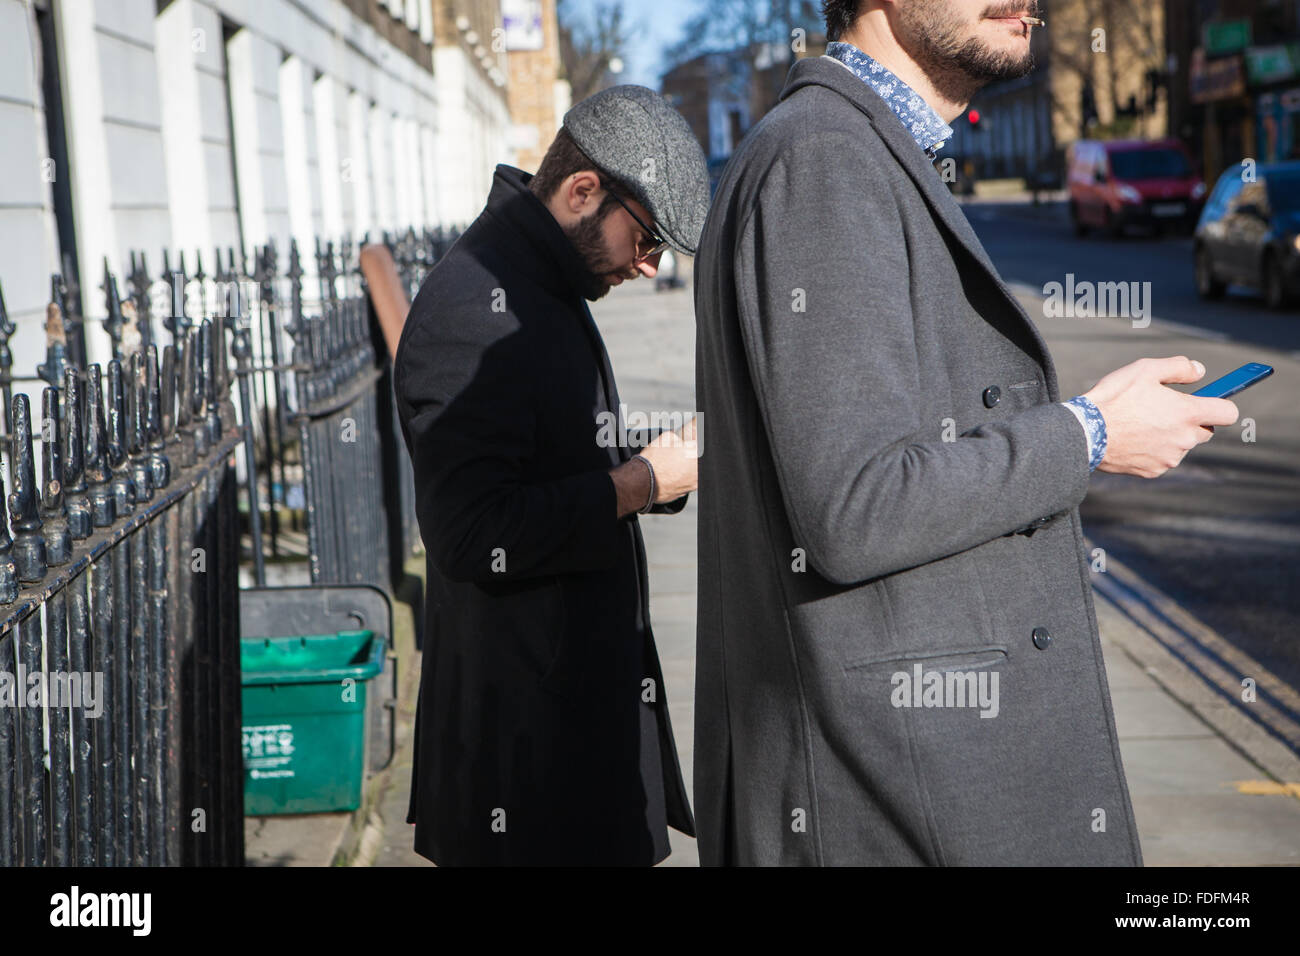 Hipsters using phones on London Street Stock Photo